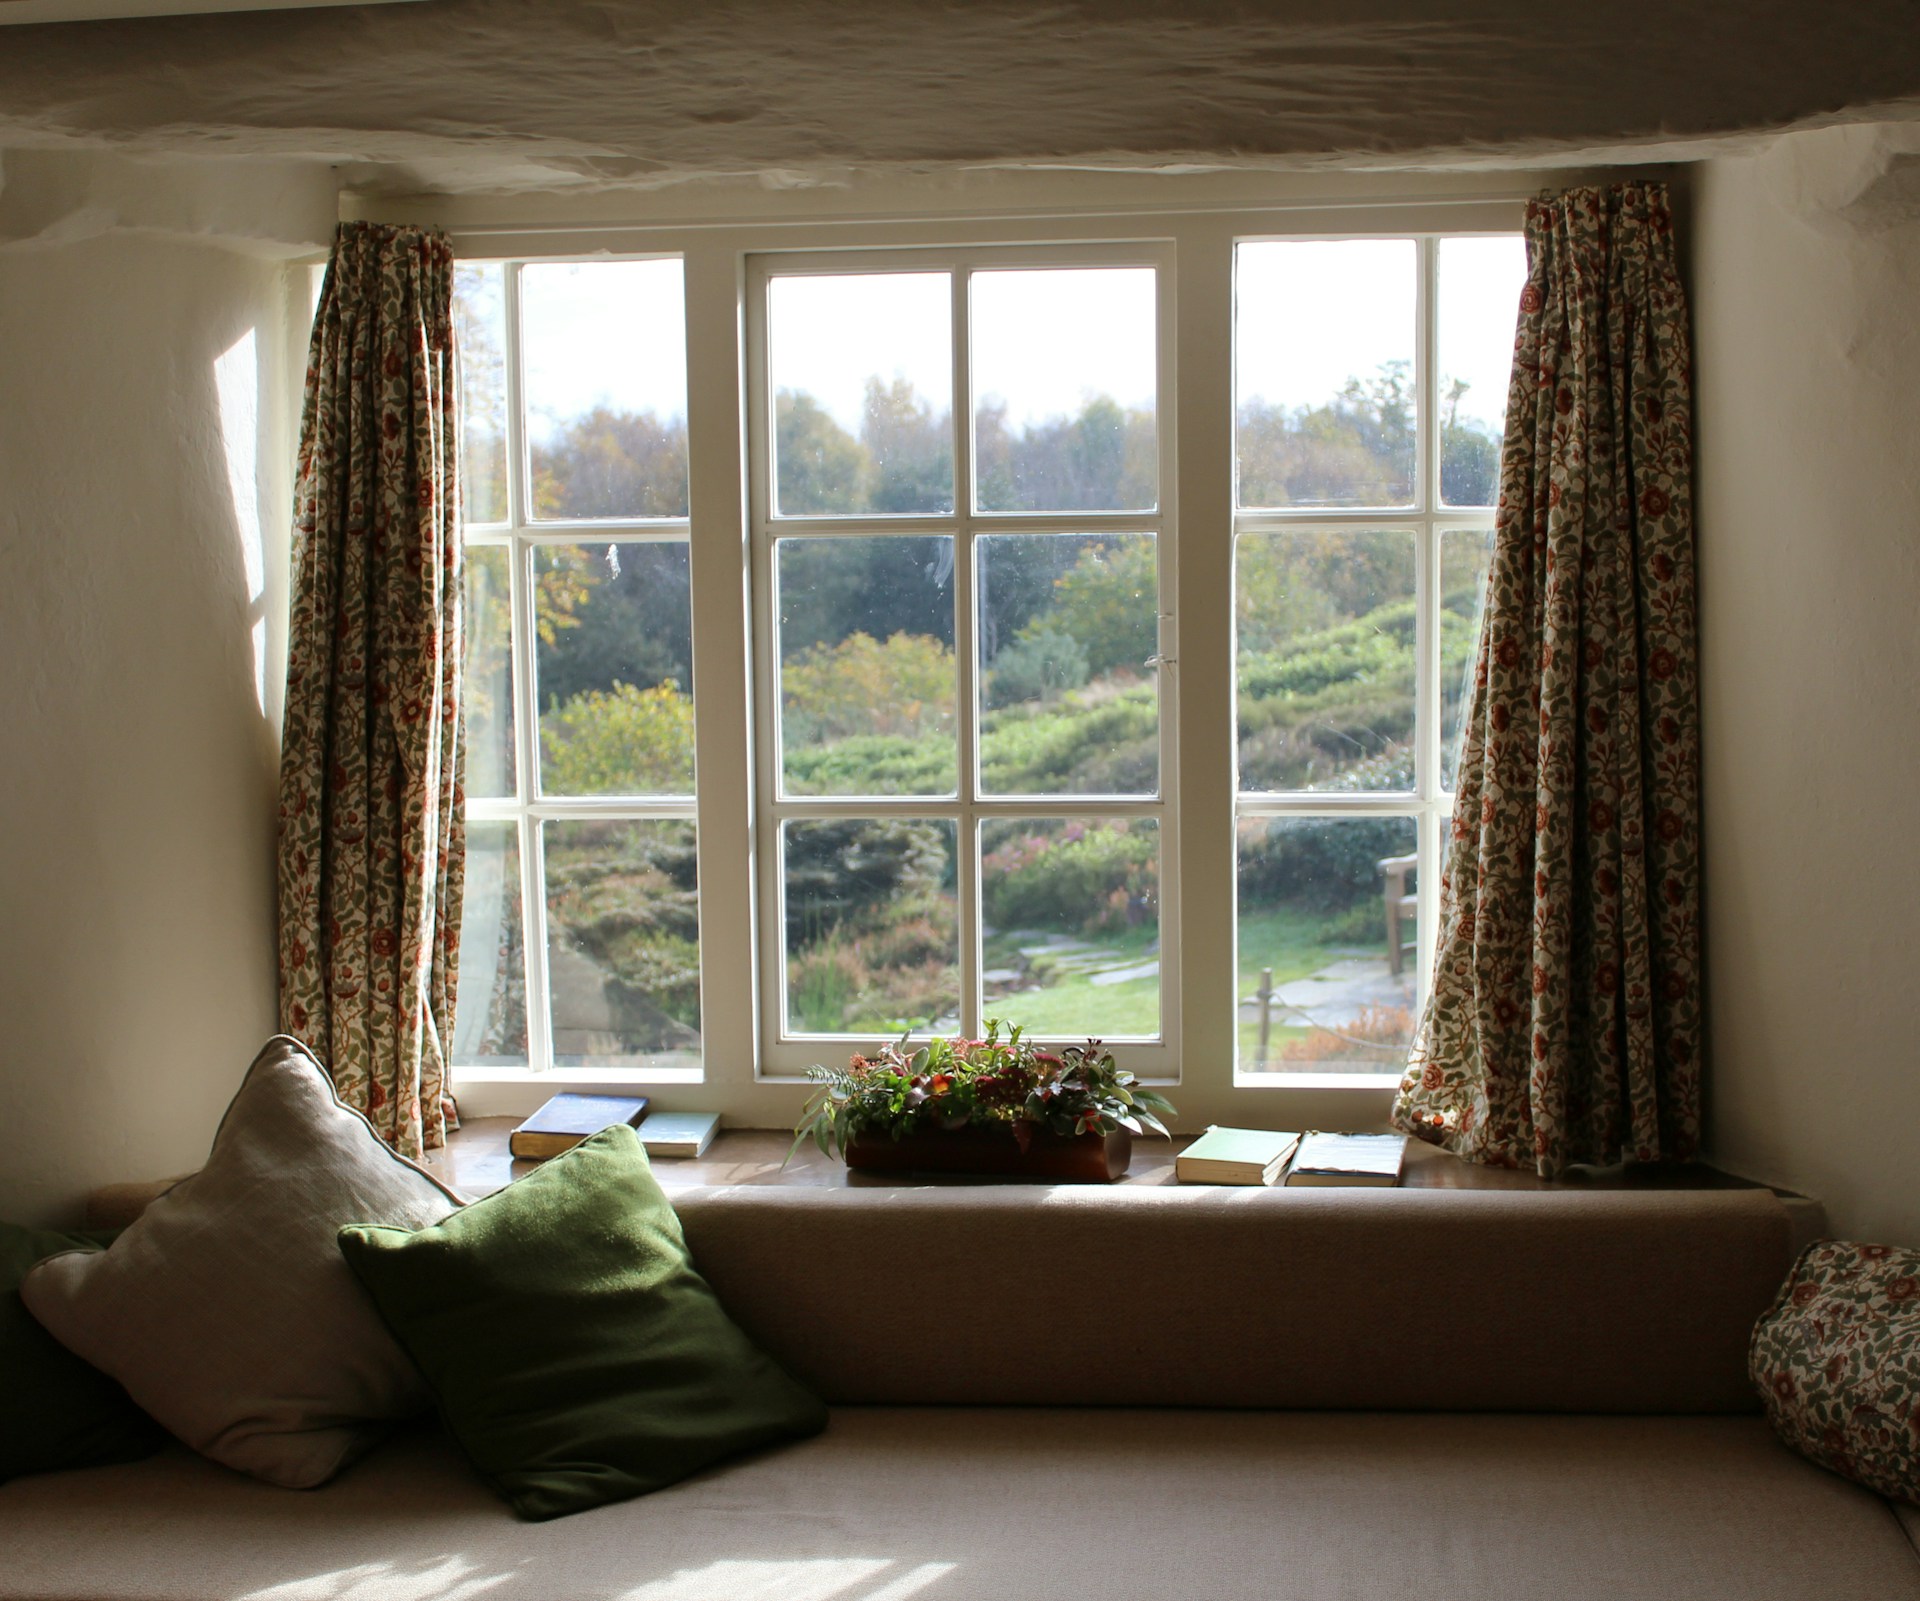 Weather Wearing Down on Your Windows? Top Tips to Fix It